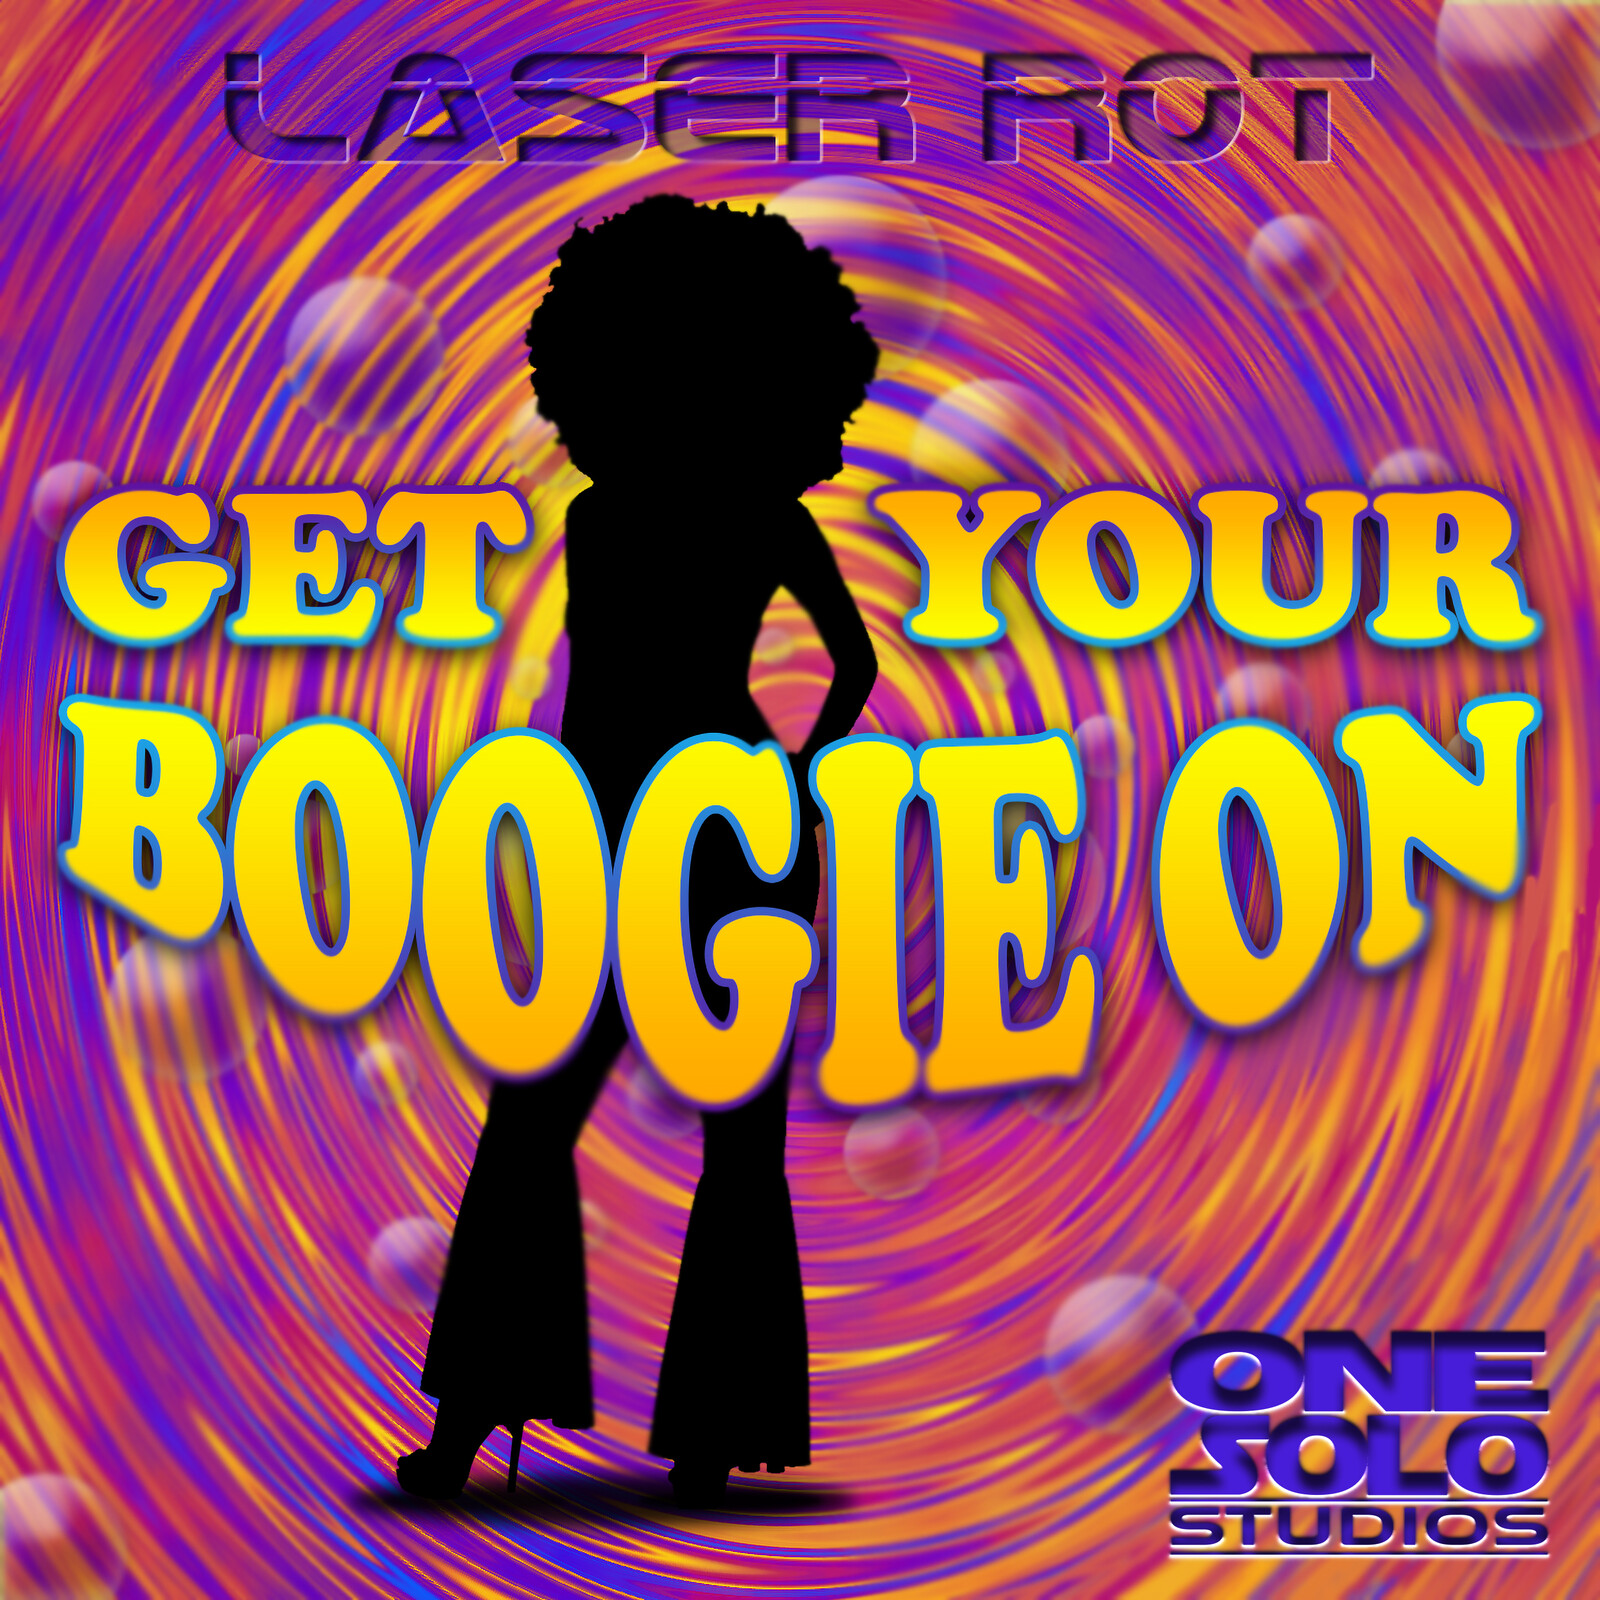 Get Your Boogie On (Album Cover Artwork)